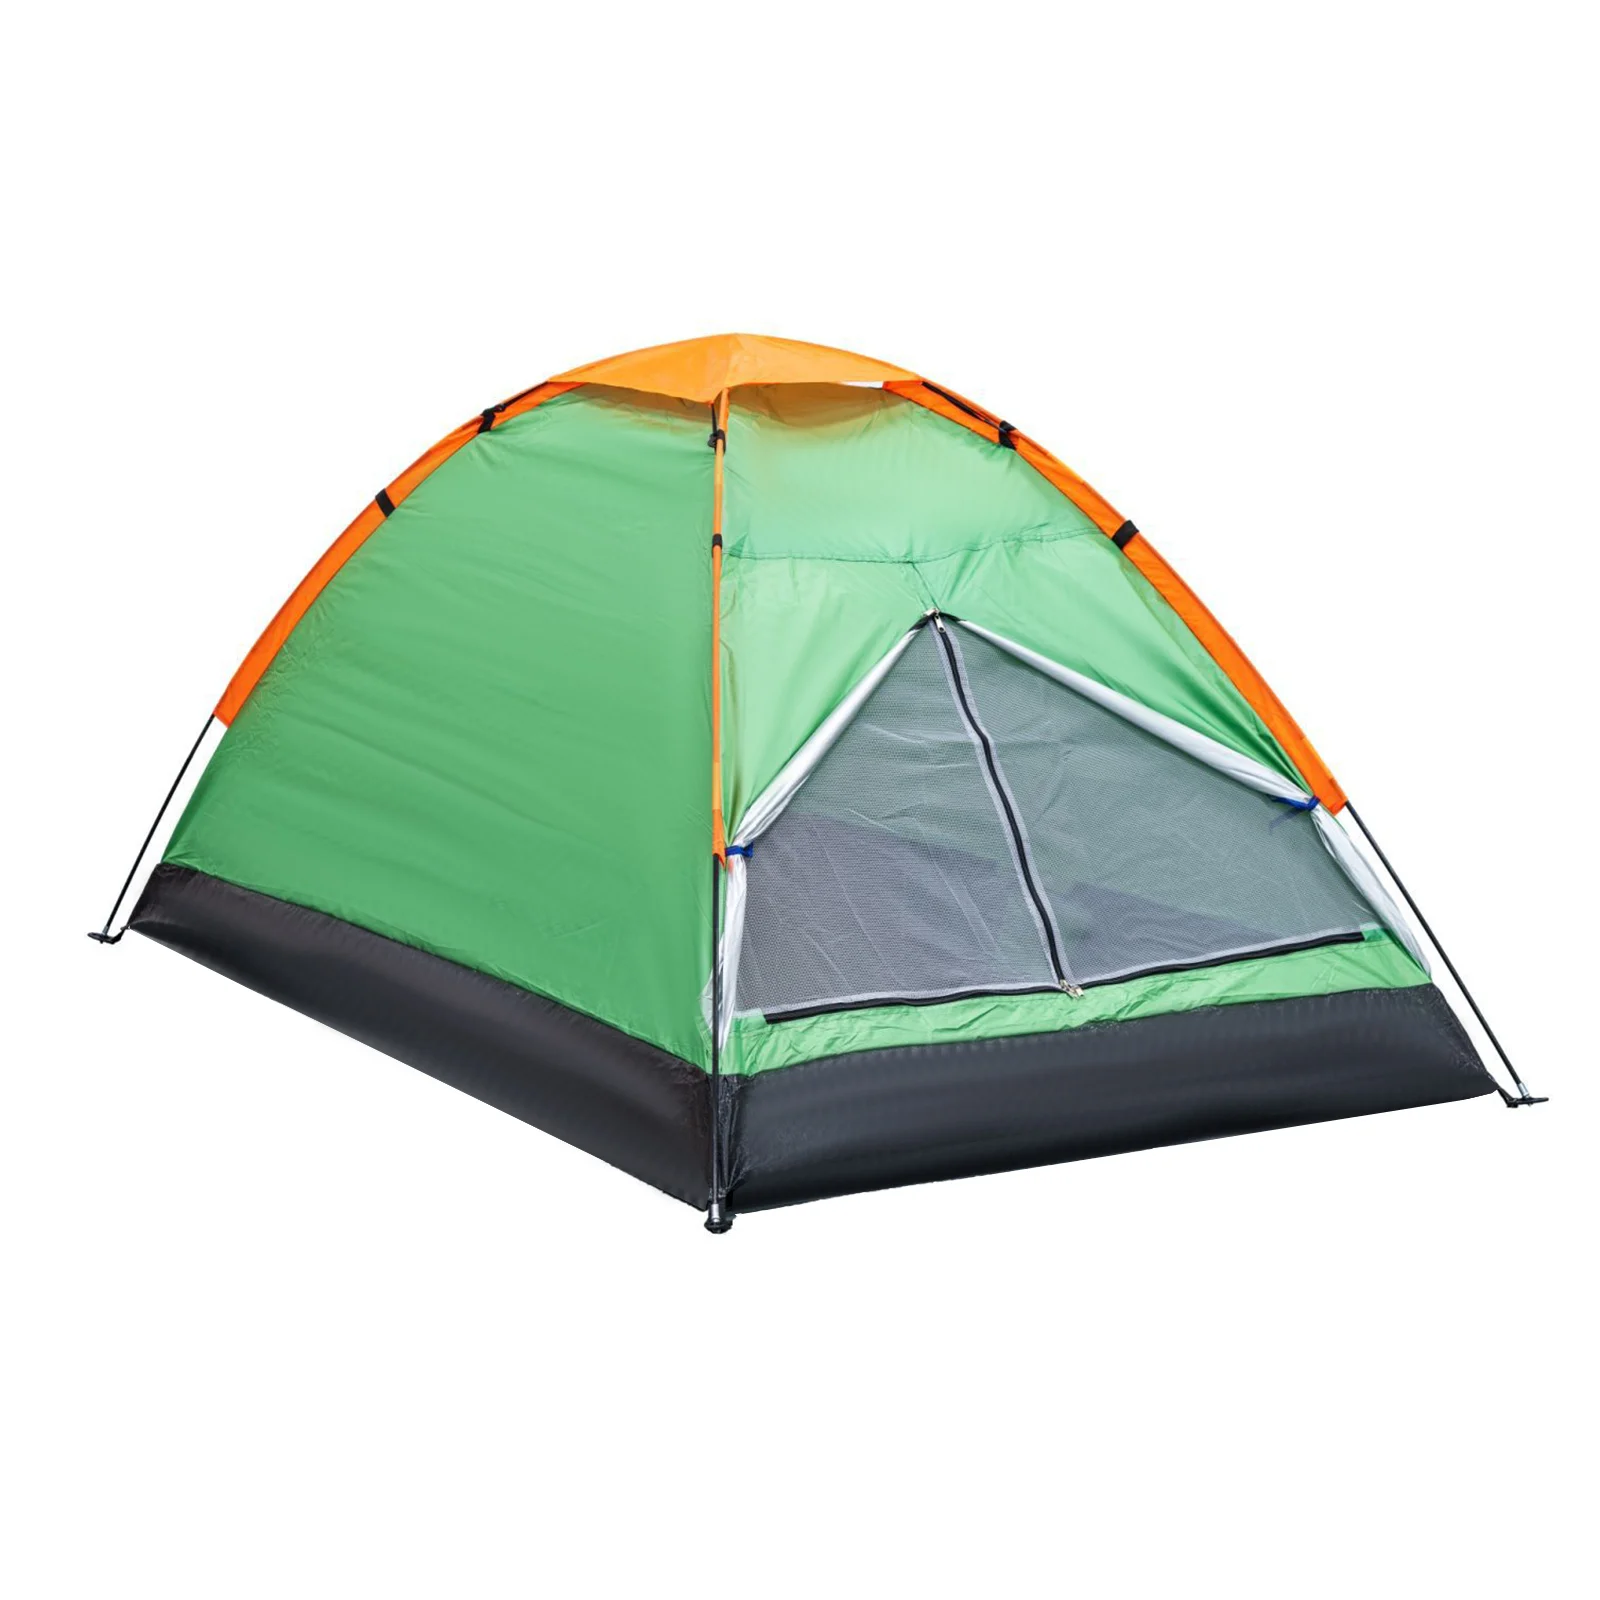 

2-Person Camping Tent With Rain Fly Carrying Bag Two-way Zips Design Tent Lightweight Compact Beach Tent For Backpacking Hiking